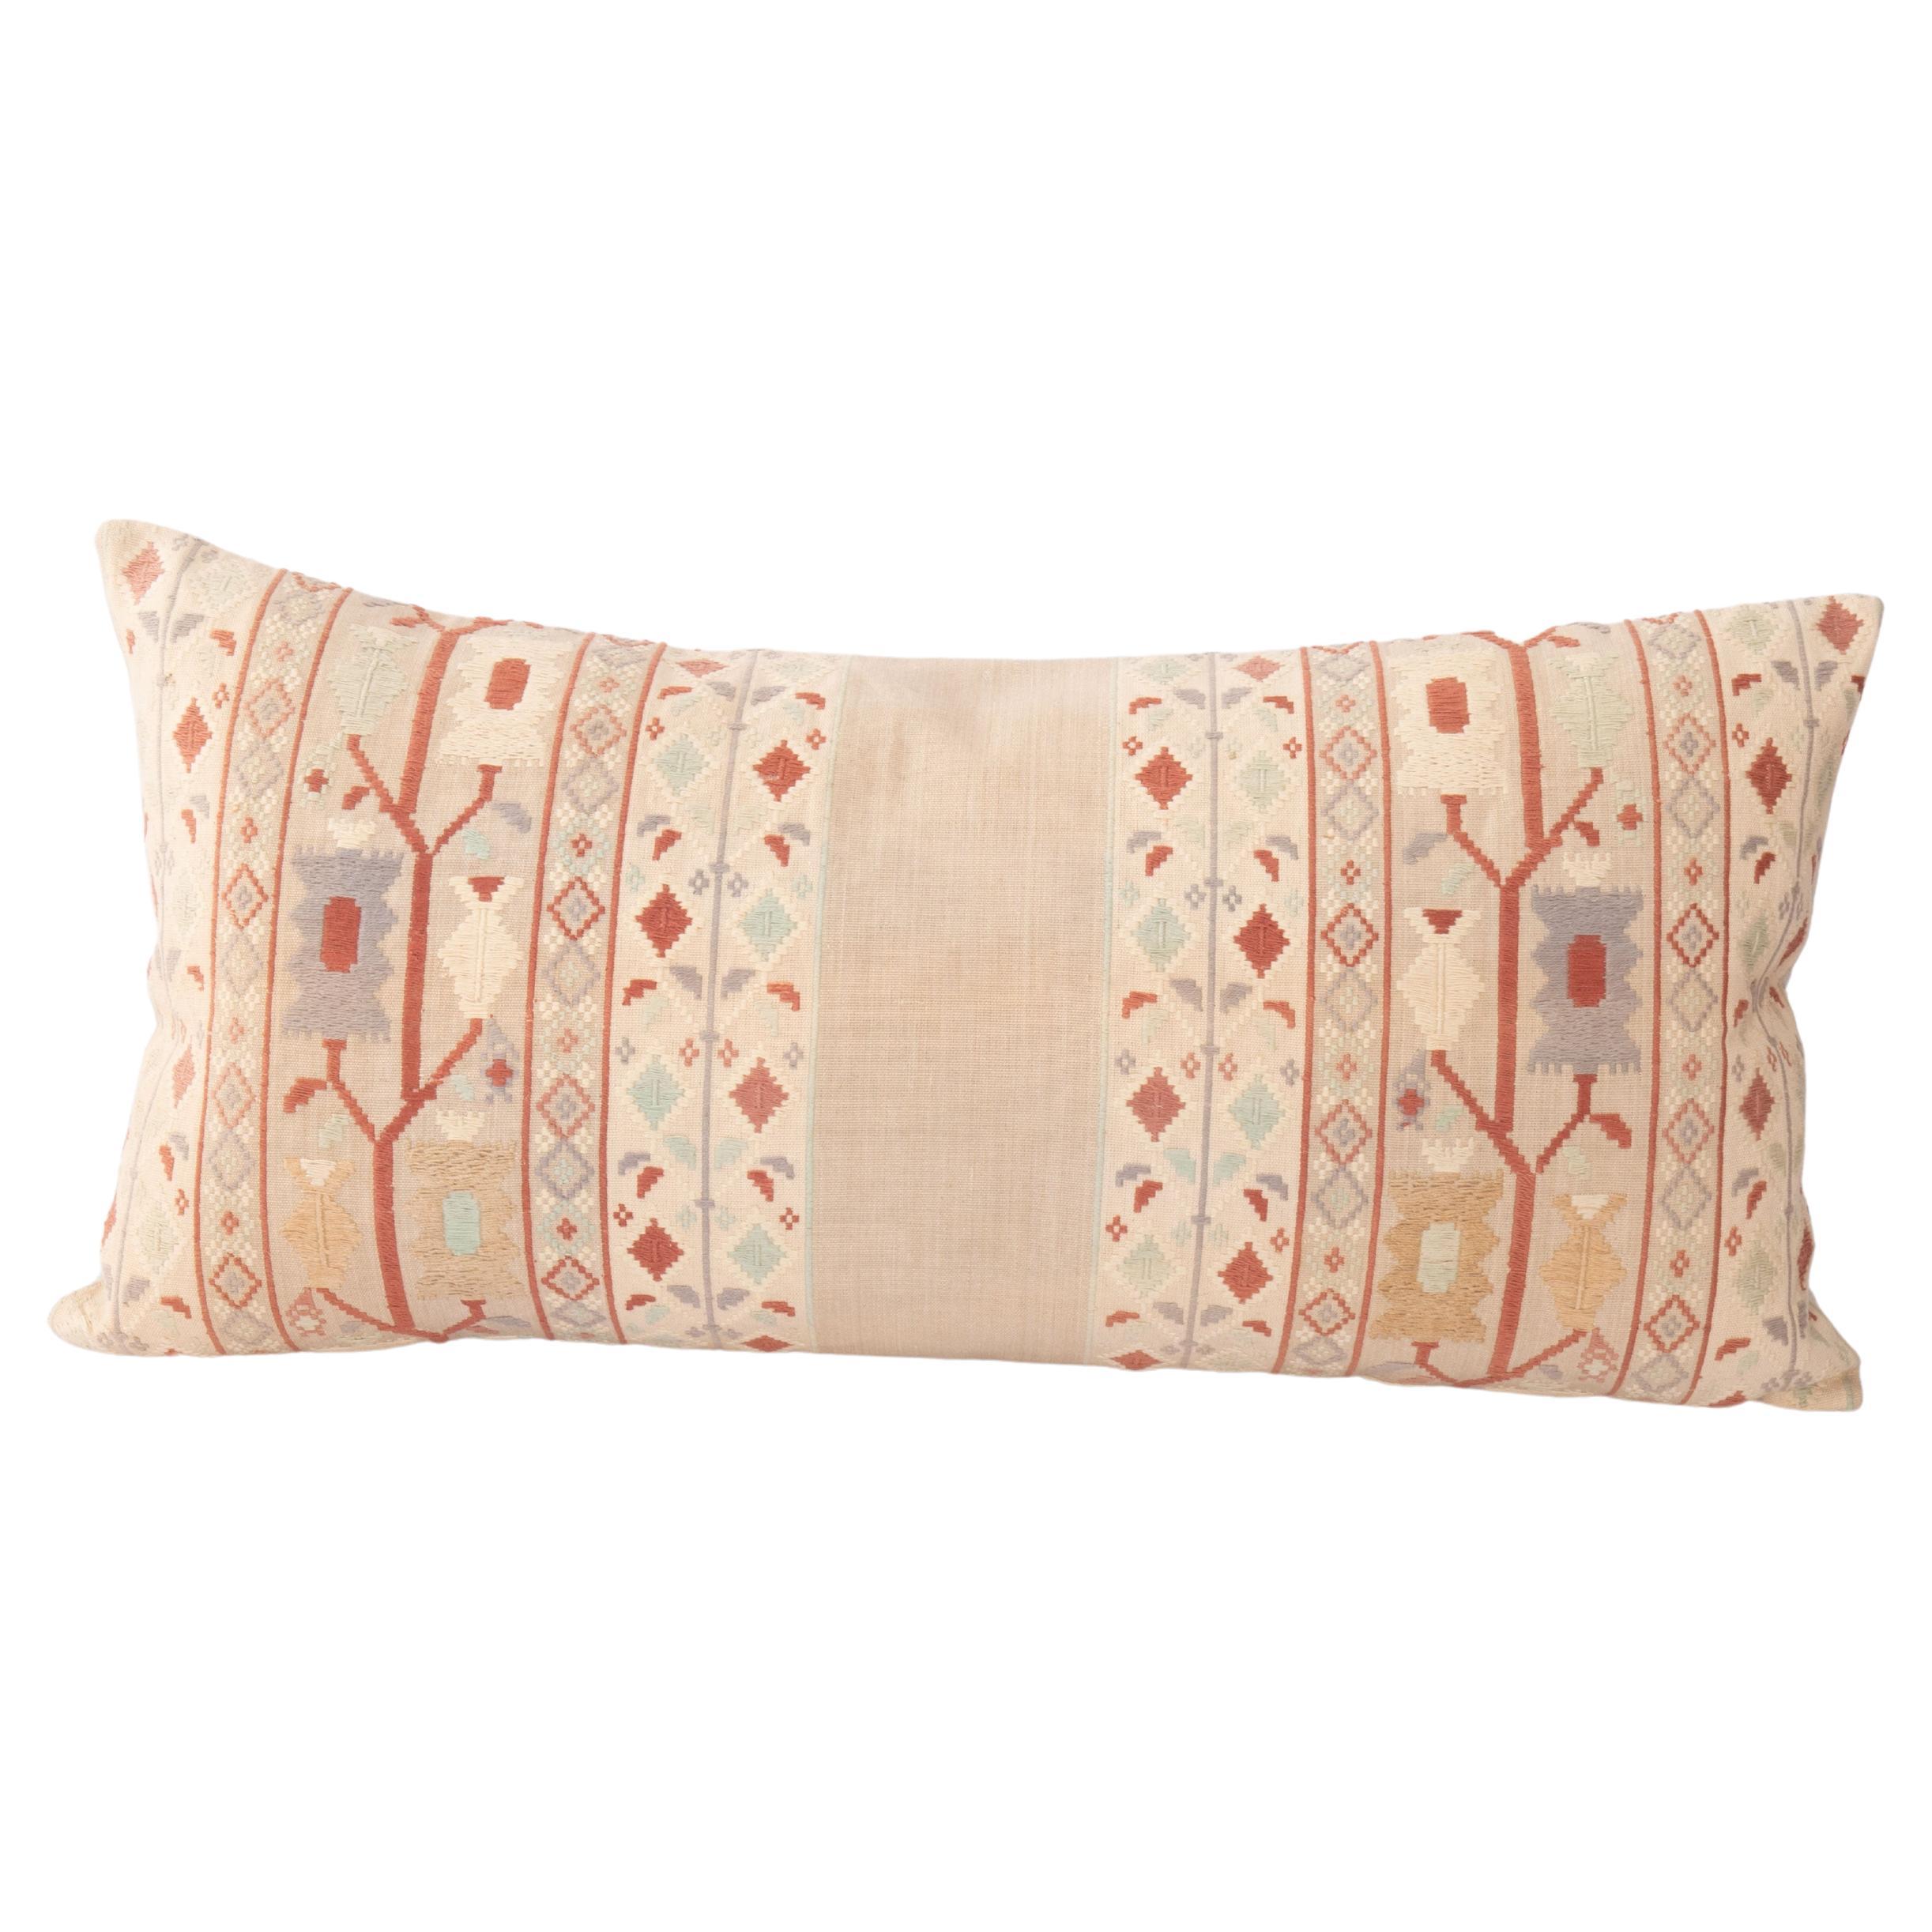 Pillow Cover Made From a Vintage East European Linen and Cotton Textile